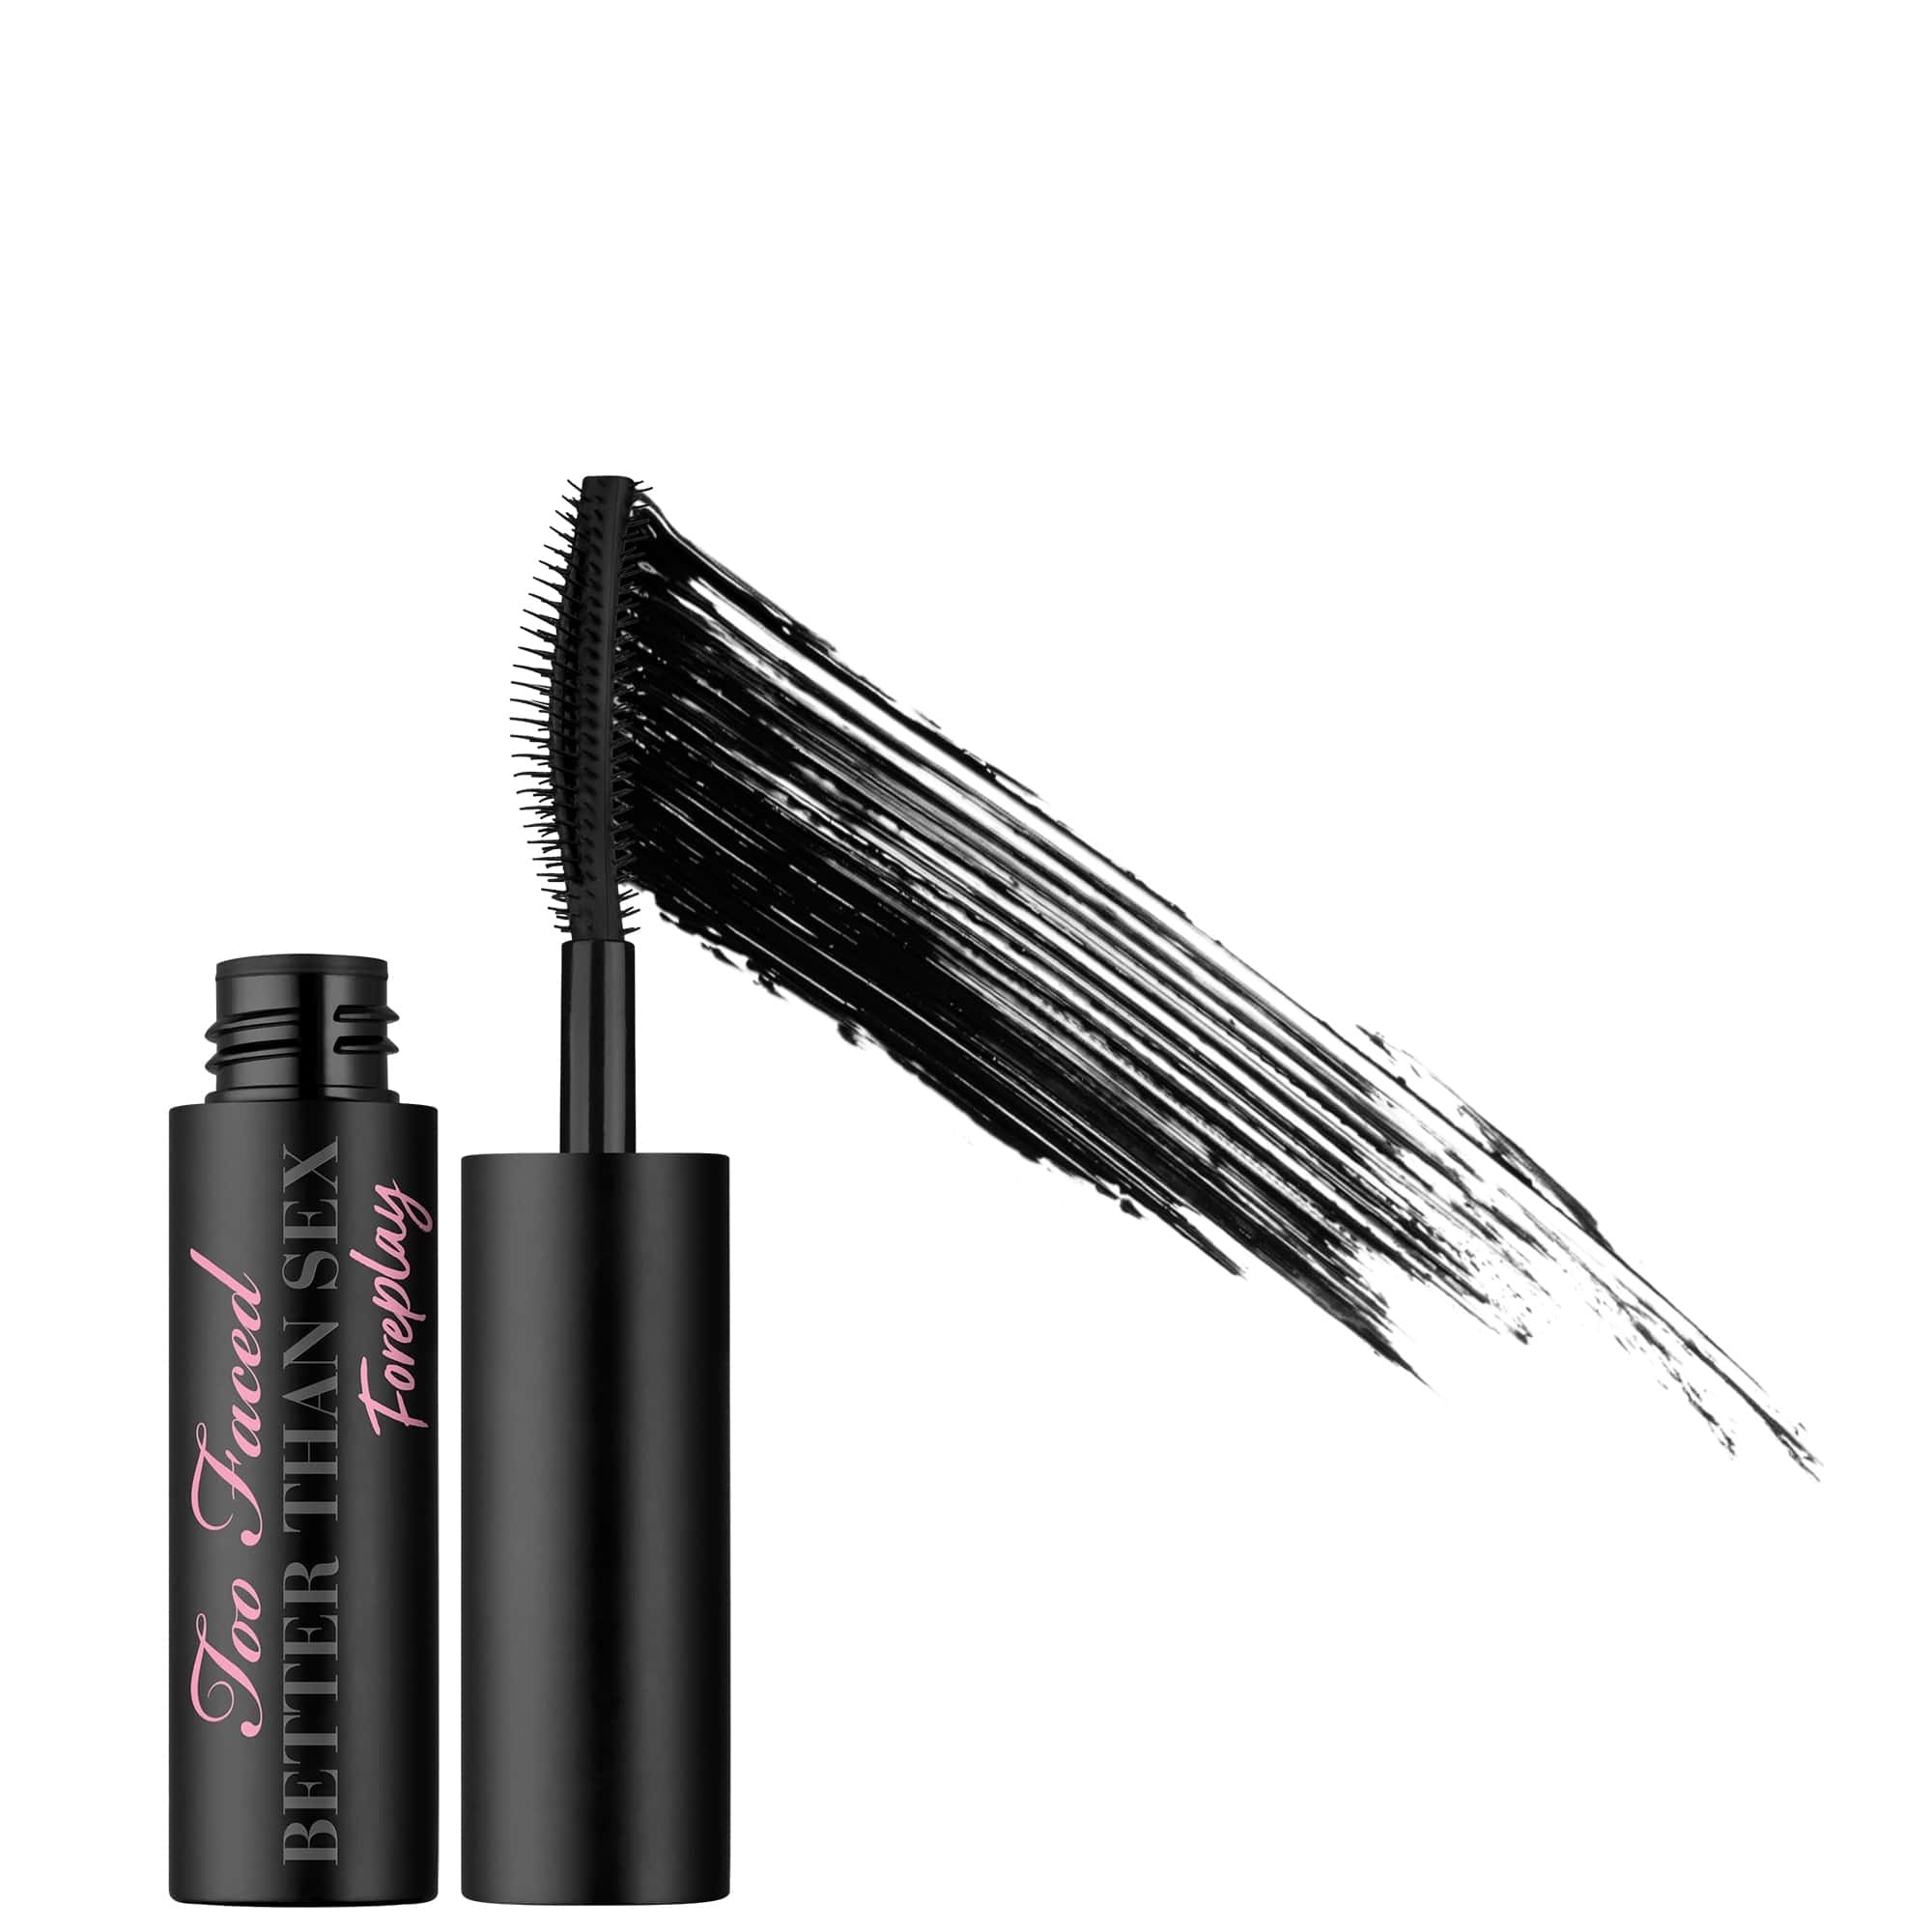 Too Faced Travel Better Than Sex Foreplay Instant Lengthening, Lifting & Thickening Mascara Primer 4ml